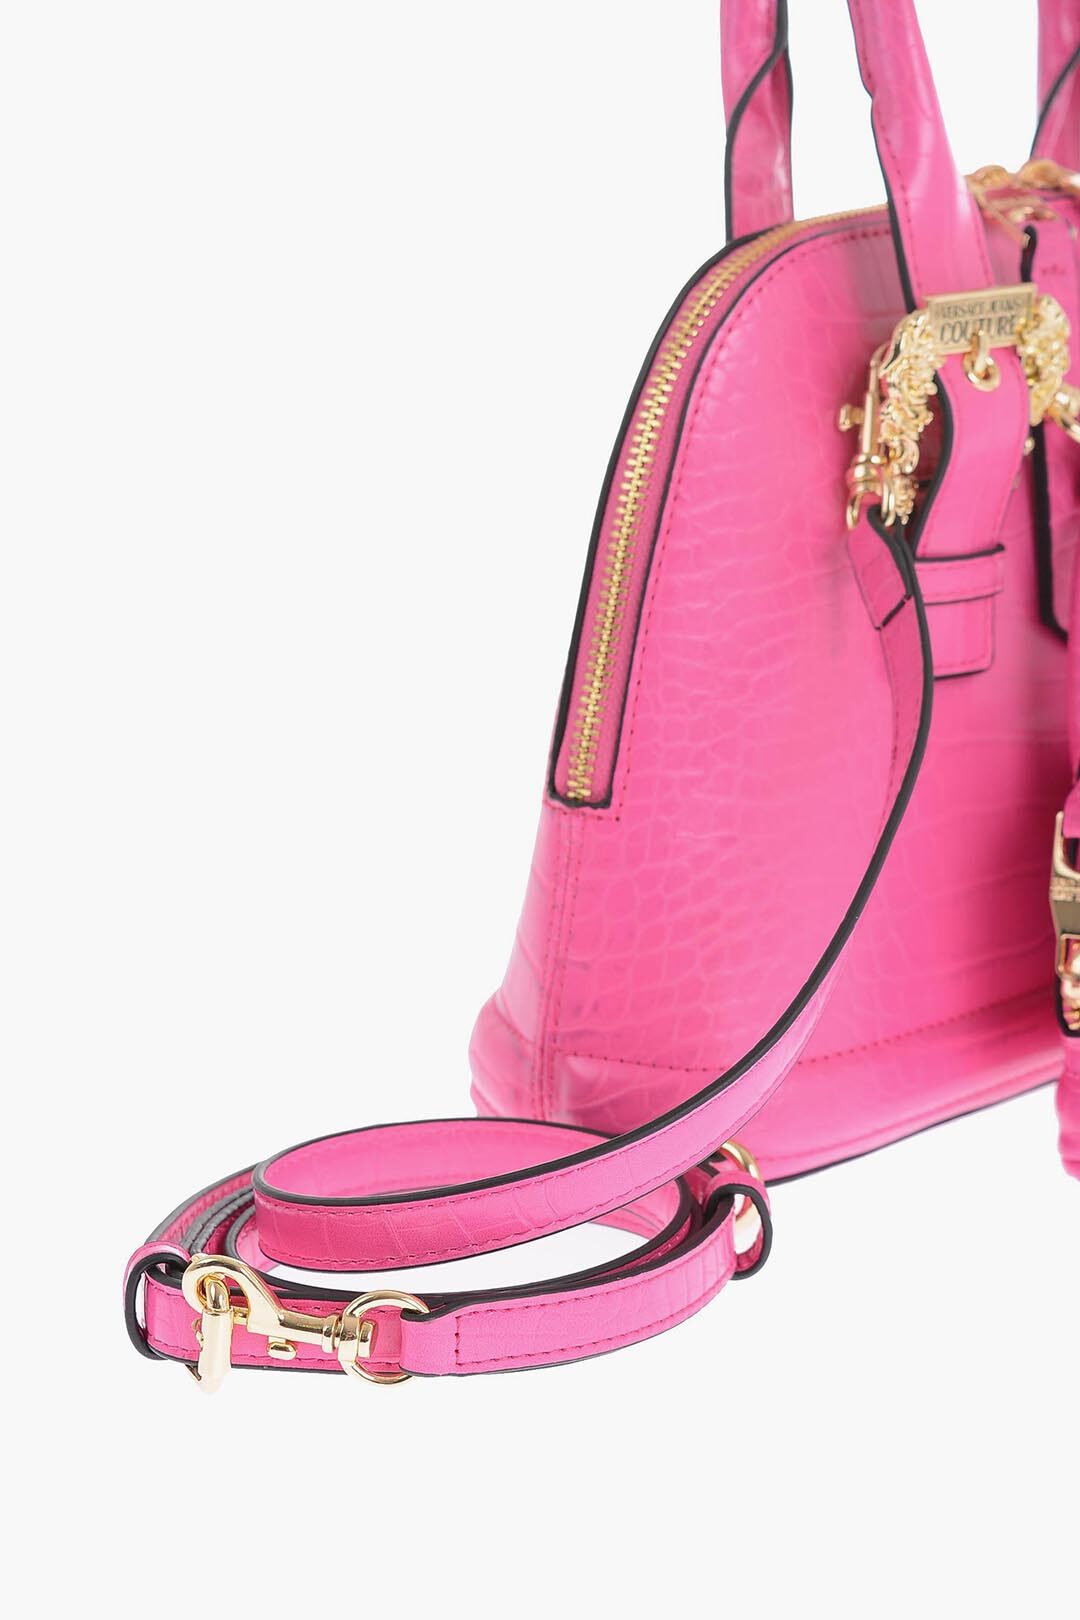 Versace Jeans Couture Heart-Shaped Shoulder Bag - Pink for Women